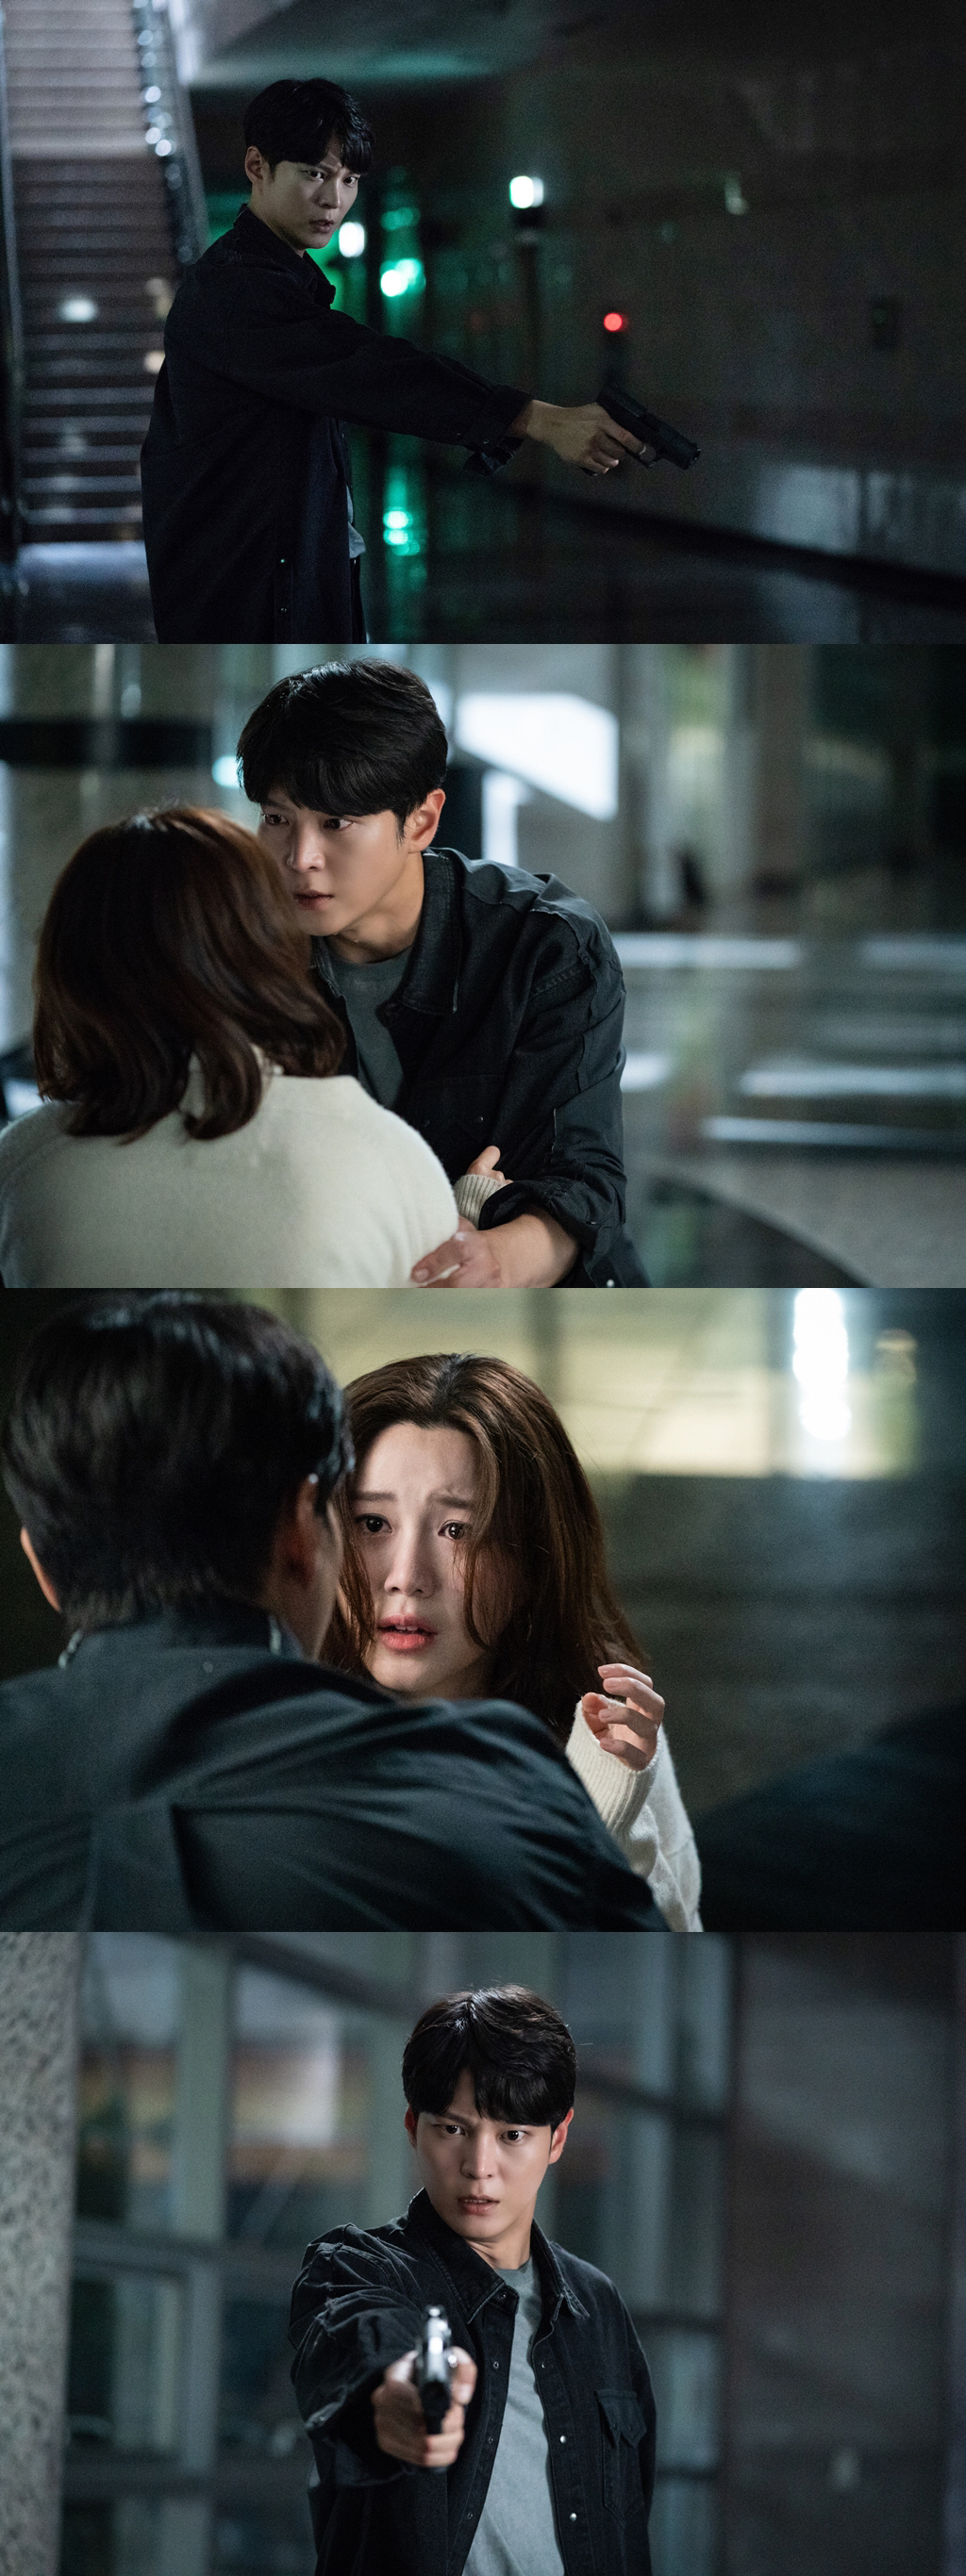 Alice Joo Won faces Lee Da-in in death DangerSBS gilt drama Alice (playplayplayed by Kim Gyu-won, Kang Cheol-gyu, Kim Ga-young/directed by Baek Soo-chan/production StudiosS/investment wave) leaves only two times to the end.Alice, who flipped the house theater on Friday and Saturday night with the development of the imagination and the shock ending every time, is attracting the attention and expectation of viewers in the last story.The last 14 Alice endings were a shock itself.Yoon Tae-yi (Kim Hee-sun), who went to Journey to the Center of Time in 2010, analyzed the DNA of an unidentified black hooded man suspected of strangling his neck and killing Park Sun-young in 2010.Unfortunately, I found out that his DNA and his DNA match. Yoon Tae-yi speculated that Park Jin-gum, who is from another level, is the real killer.However, Park Jin-gum, who heard this situation, turned to Yoon Tae-yi and finished 14 times Alice.Perhaps Park Jin-gyeom is the culprit. The curiosity and sadness of viewers are bound to soar.Meanwhile, on October 23, the production team of Alice will focus attention on the appearance of Friend Kim Do-yeon (Lee Da-in), who is keeping Park Jin-gyeoms side after Yoon Tae-i, ahead of the 15th broadcast.Park Jin-gum in the public photo is wary of the surroundings with his gun in the dark, and I feel a sense of tension that is like something will happen at any moment.In the next photo, Park Jin-gum reveals why he is so nervous.His only friend, Kim Do-yeon, is sitting on the floor with a look of terror. Kim Do-yeons eyes are filled with tears of fear and fear.Park seems to be trying to calm her down, clutching Kim Do-yeons shoulder tightly, and in the next photo you can see her pointing a gun at someone.Park Jin-gum has been in Journey to the Center of Time in 2010, and has been threatening people around him without knowing himself.Something changed for him. At the end of the 14th, he tried to kill Yoon Tae-yi.In this situation, Kim Do-yeon and Park Jin-gum beside her were caught in horror. Anxiety can not be erased.I wonder what happened to Kim Do-yeon, how Park Jin-gum is here, and who Park Jin-gum is aiming at.In the 15th episode, which airs today (23rd), shocking events and reversals erupt one after another; in the process, Kim Do-yeon is also put in death Danger.Please watch what she can do in this situation, whether she can escape from the death Danger.I would like to ask for a lot of expectations from Actors who showed the best performance to the end. SBS Golden Drama Alice 15th, which can not be relieved until the end, will be broadcast at 10 pm tonight on Friday, October 23rd.It is also released online exclusively on the OTT platform wave.